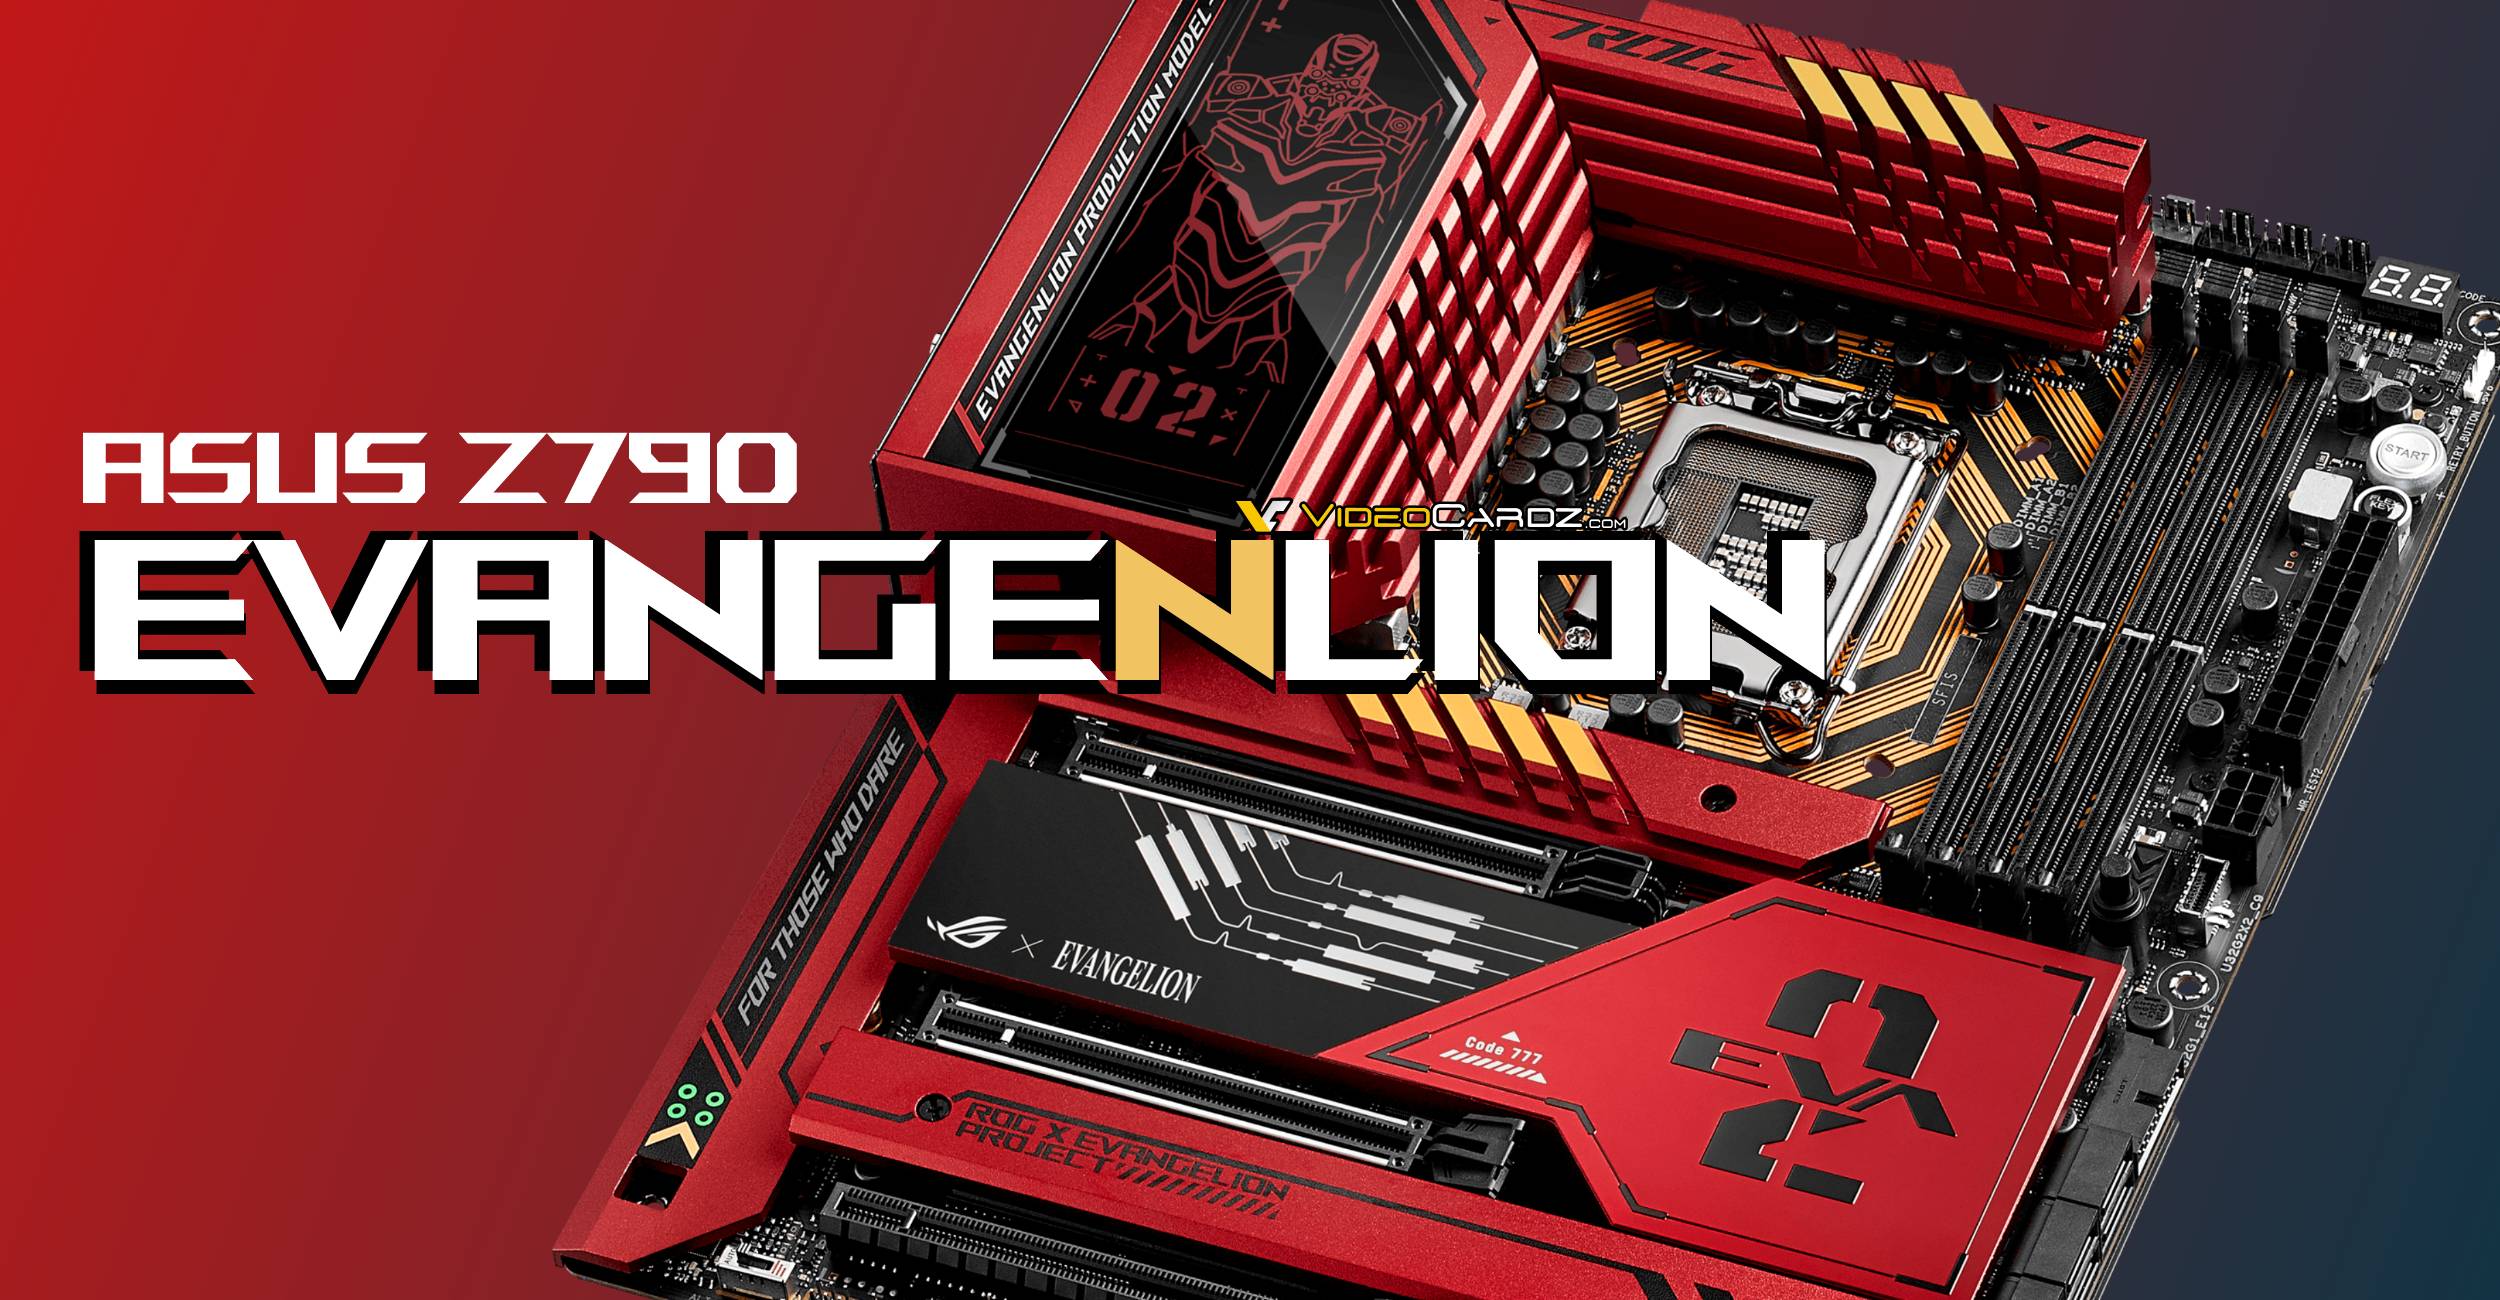 ASUS apologizes for misprinted ROG Z790 Maximus Hero "Evange-N-lion" parts, offers replacements - VideoCardz.com